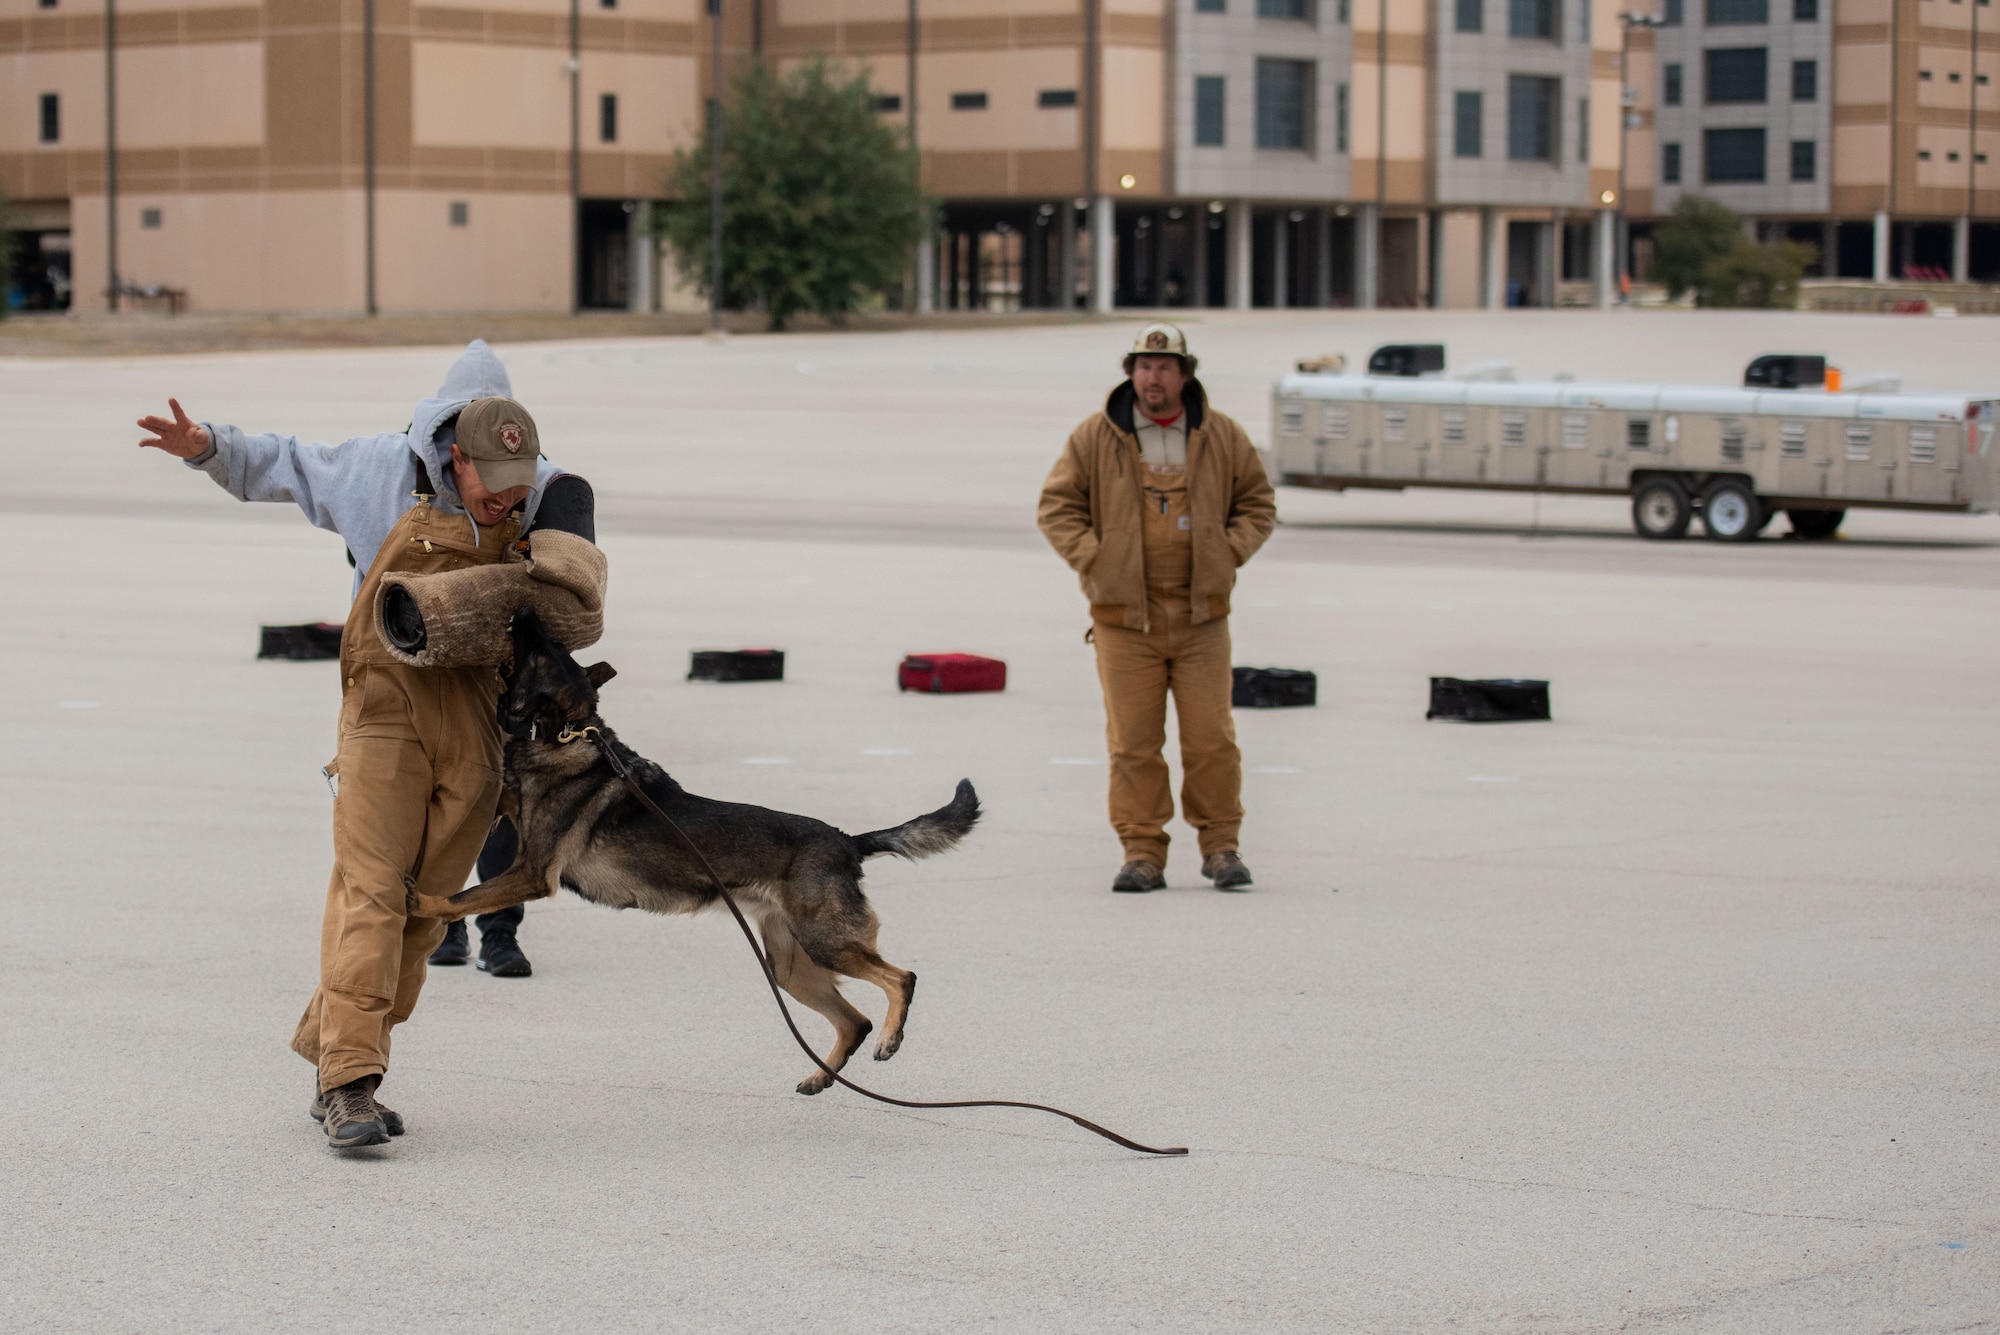 Military working dog bites a stuffed "fake arm" while performing obedience training